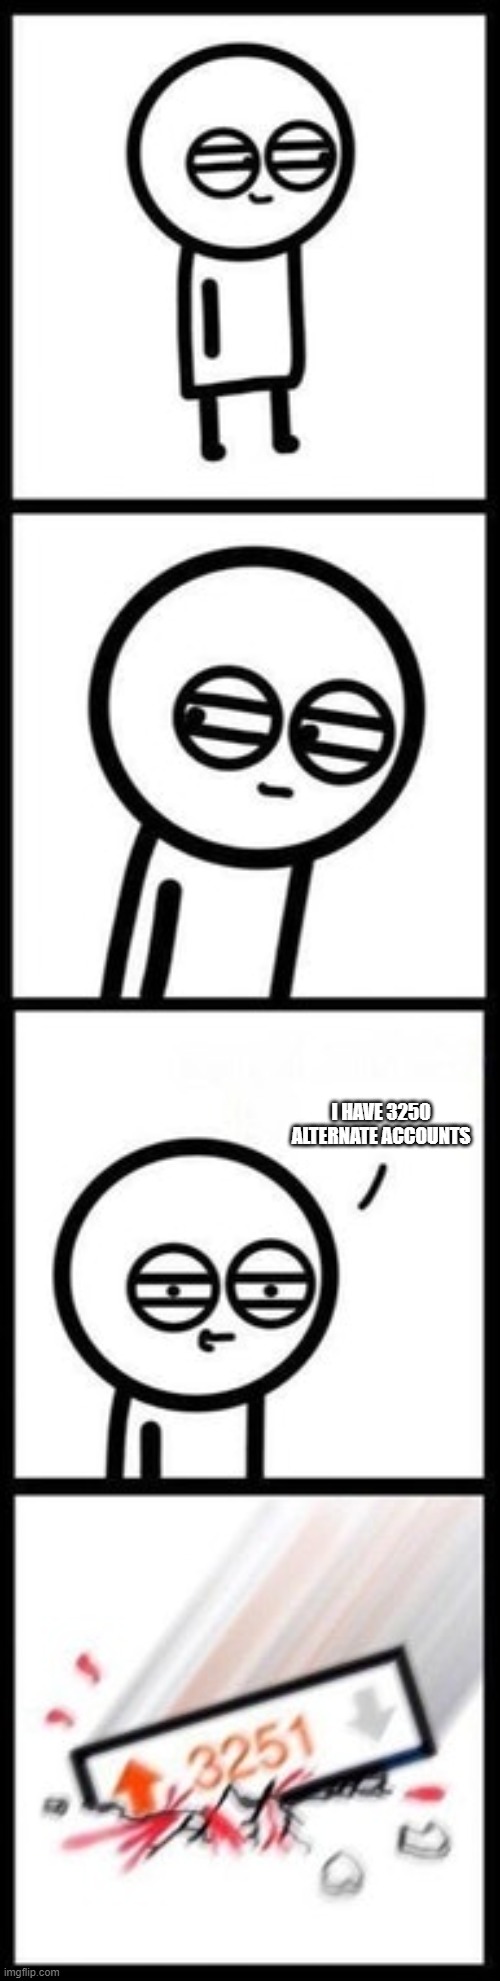 get me 30 upvotes | I HAVE 3250 ALTERNATE ACCOUNTS | image tagged in 3251 upvotes | made w/ Imgflip meme maker